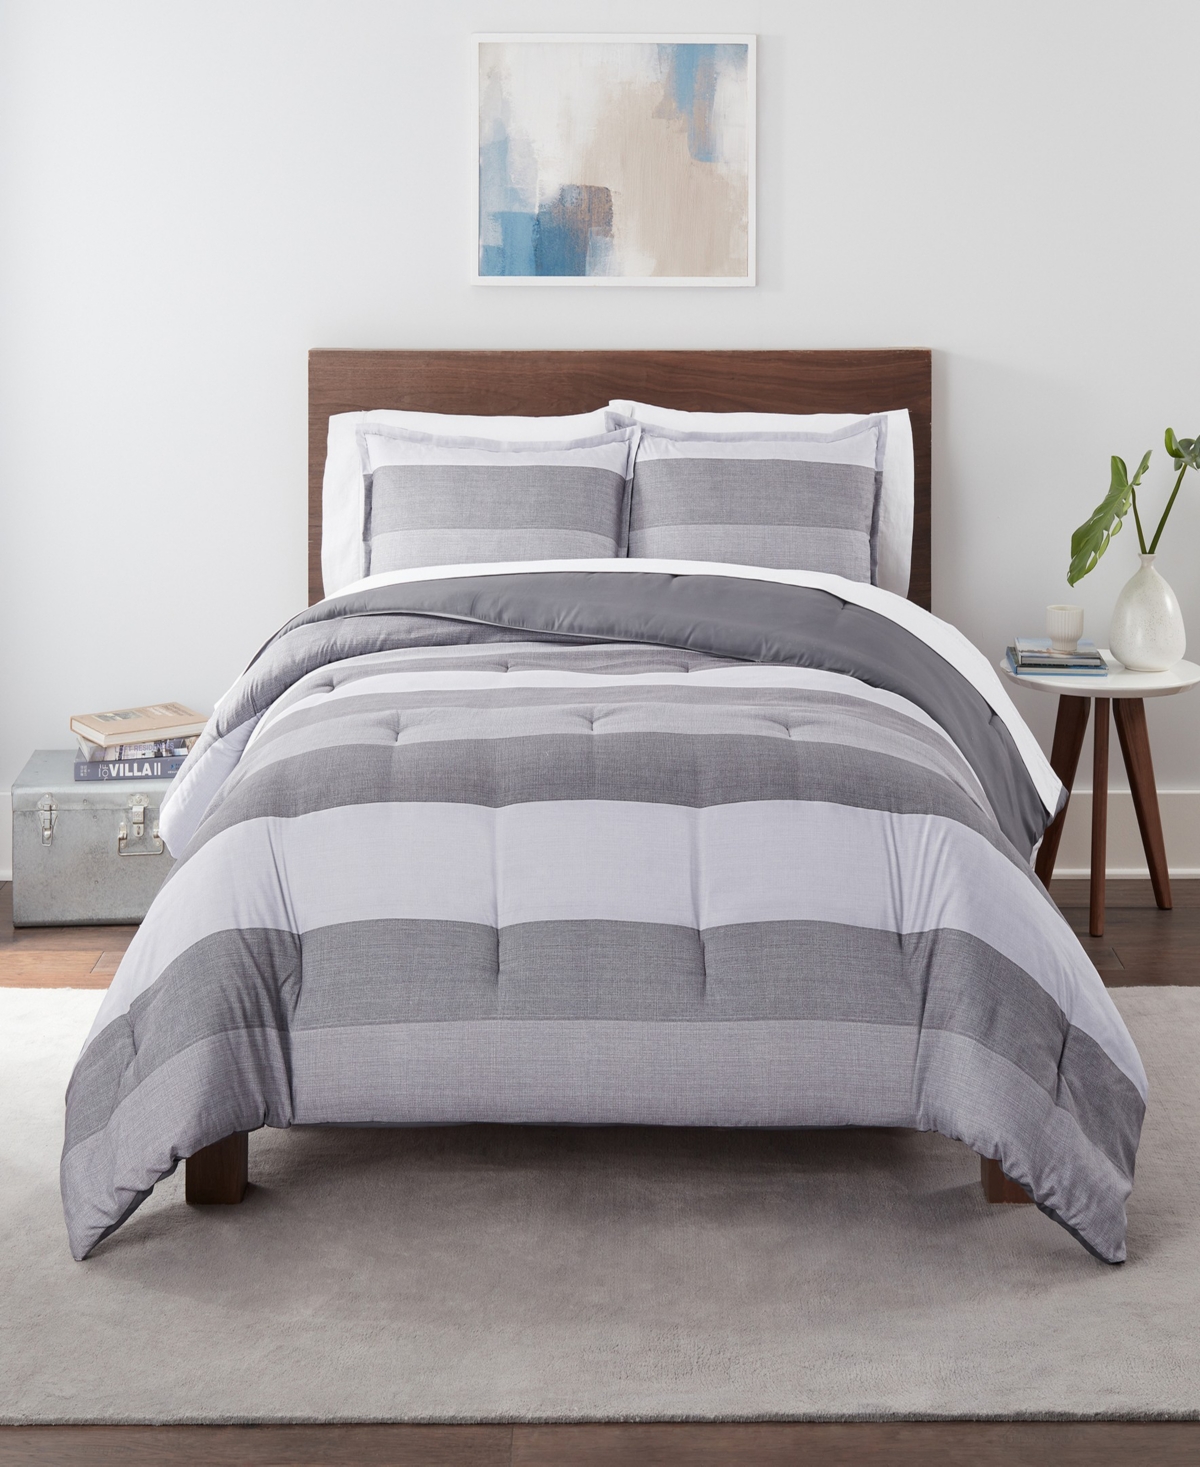 Serta Simply Clean Billy Textured Stripe Microbial-resistant 3-piece Comforter Set, Full/queen In Gray